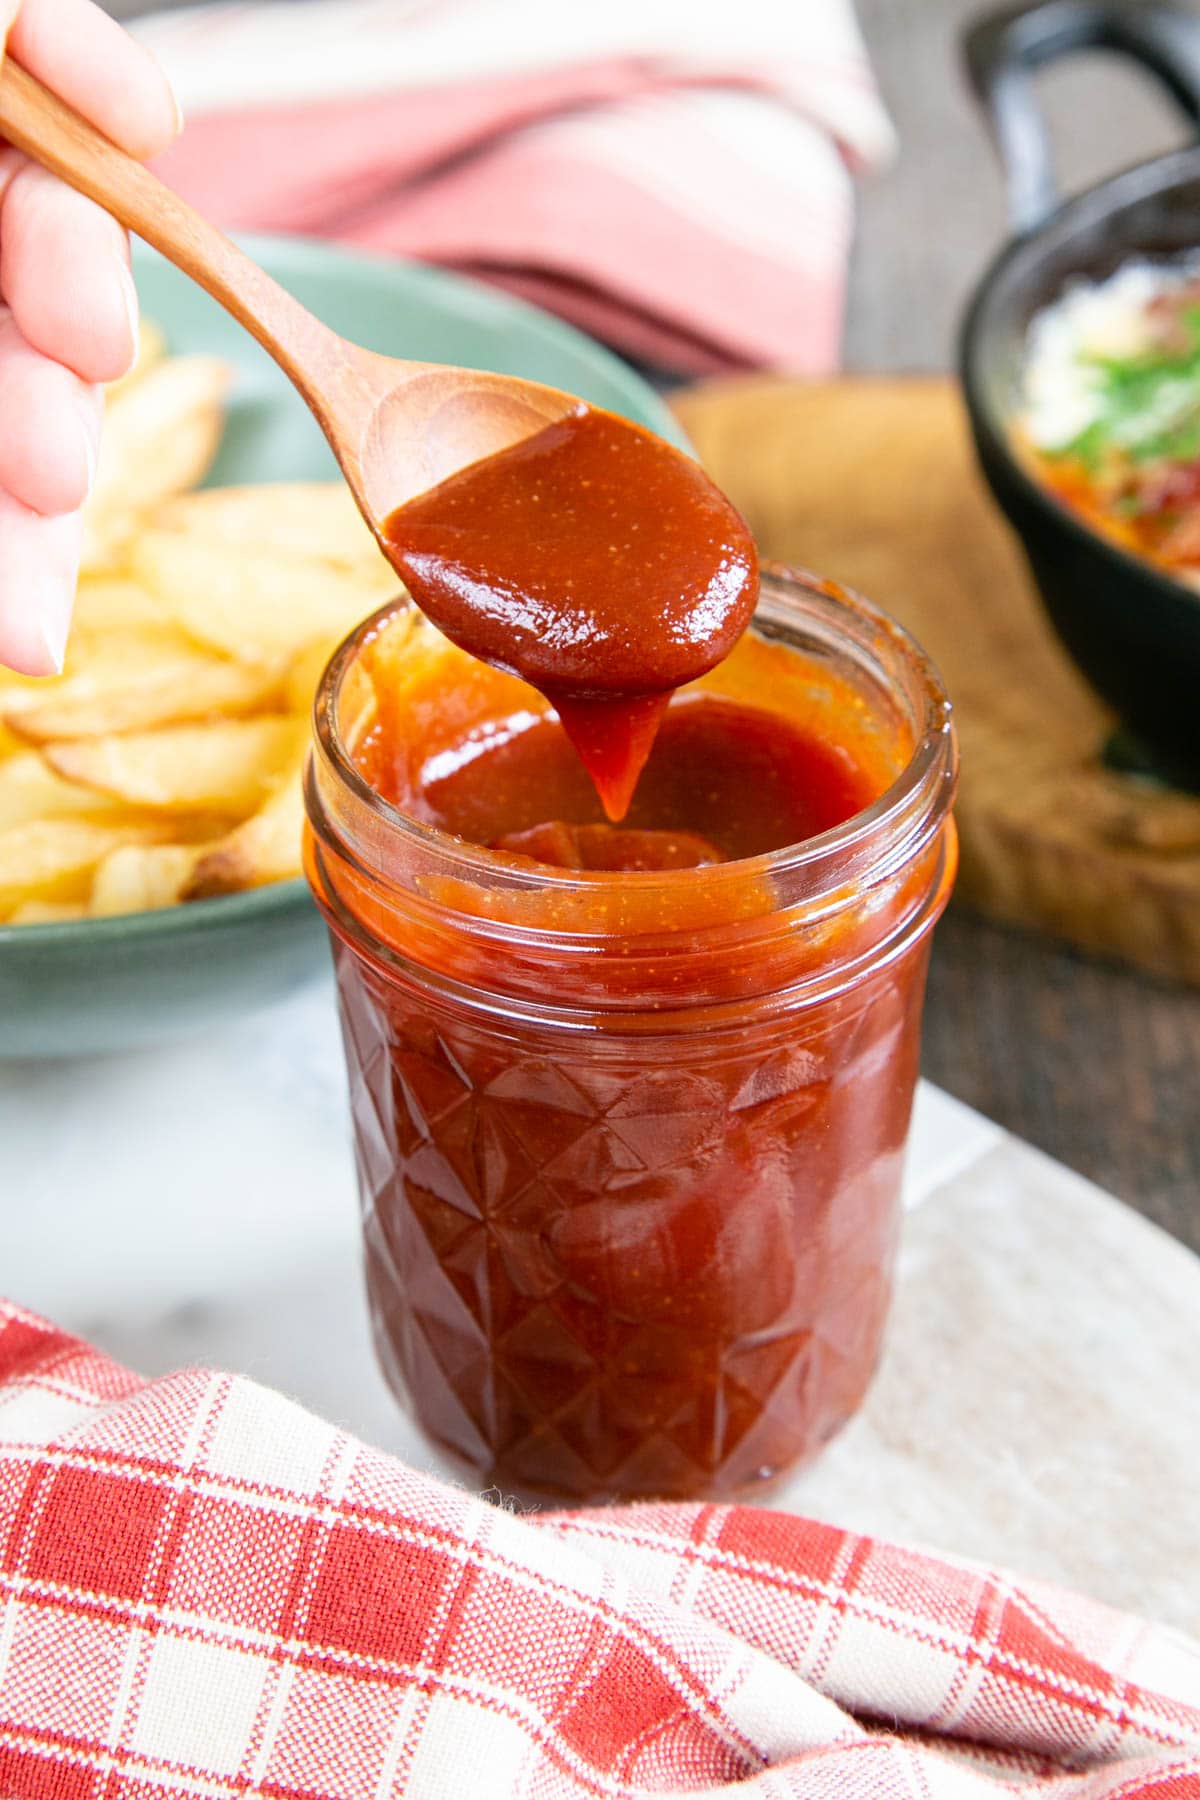 A jeweled faceted jam jar full of delicious dark red BBQ sauce. A small wooden spoon has spooned out a dollop, holding it above the jar.